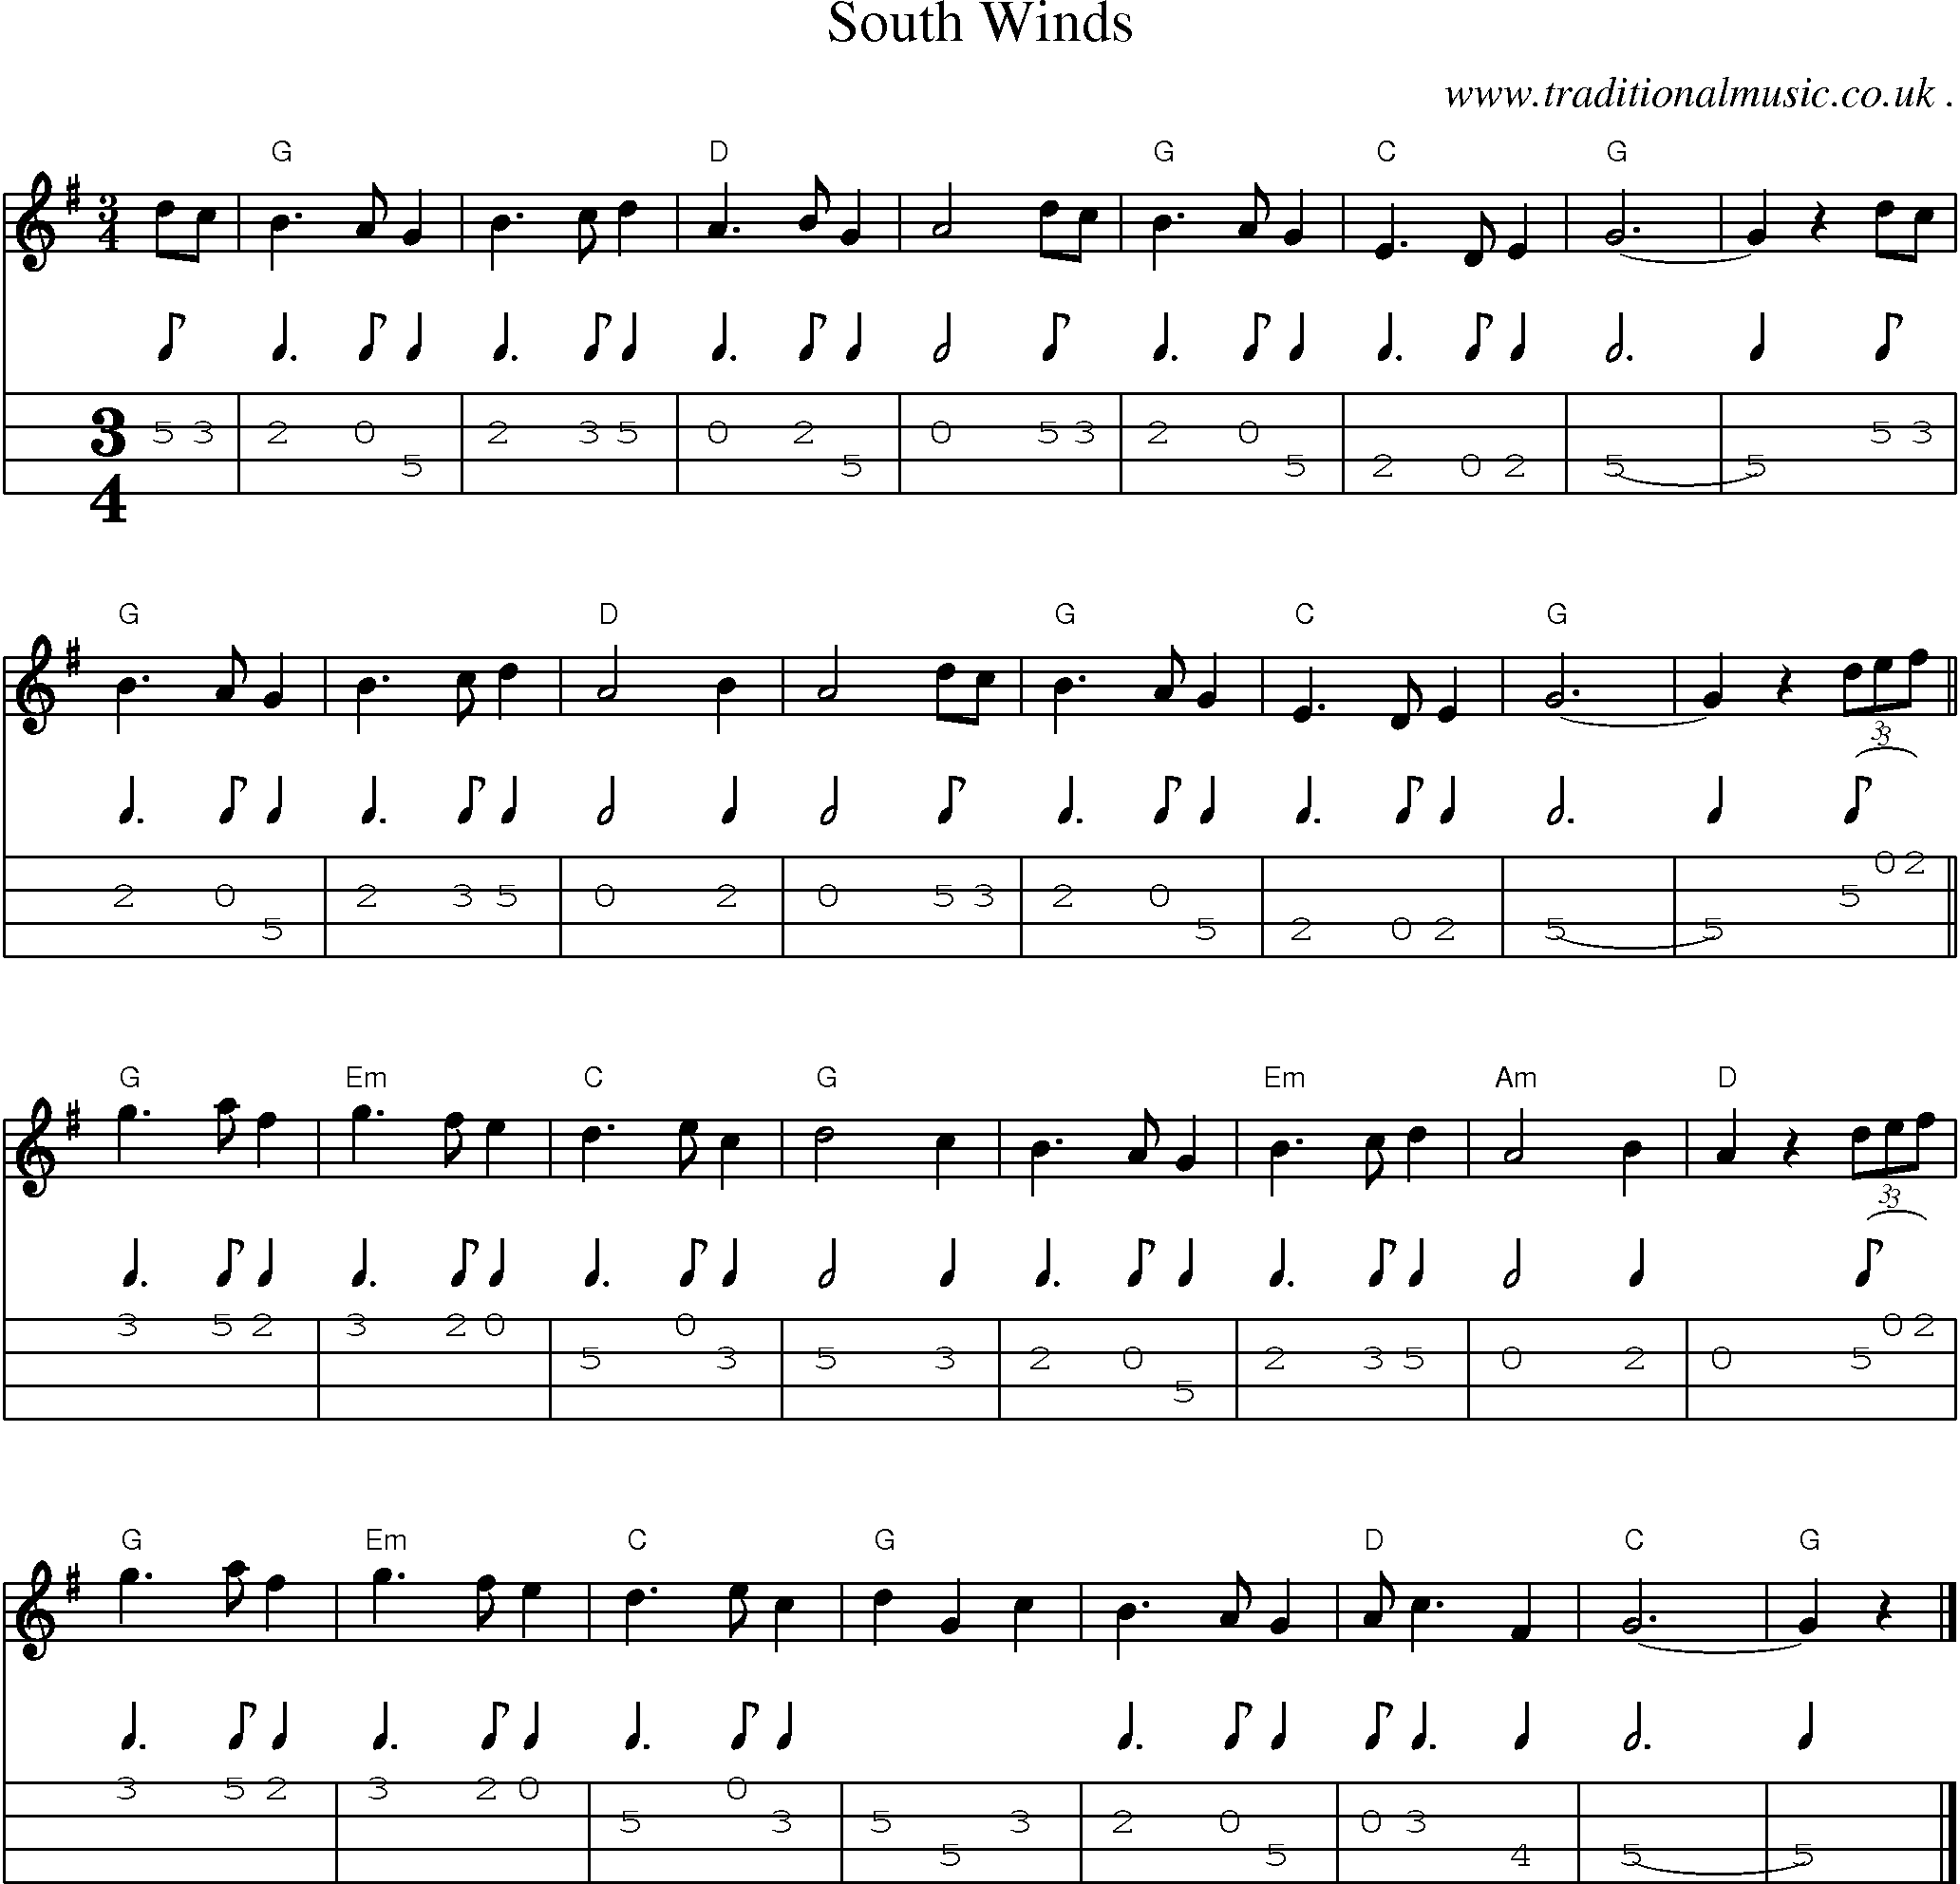 Music Score and Guitar Tabs for South Winds